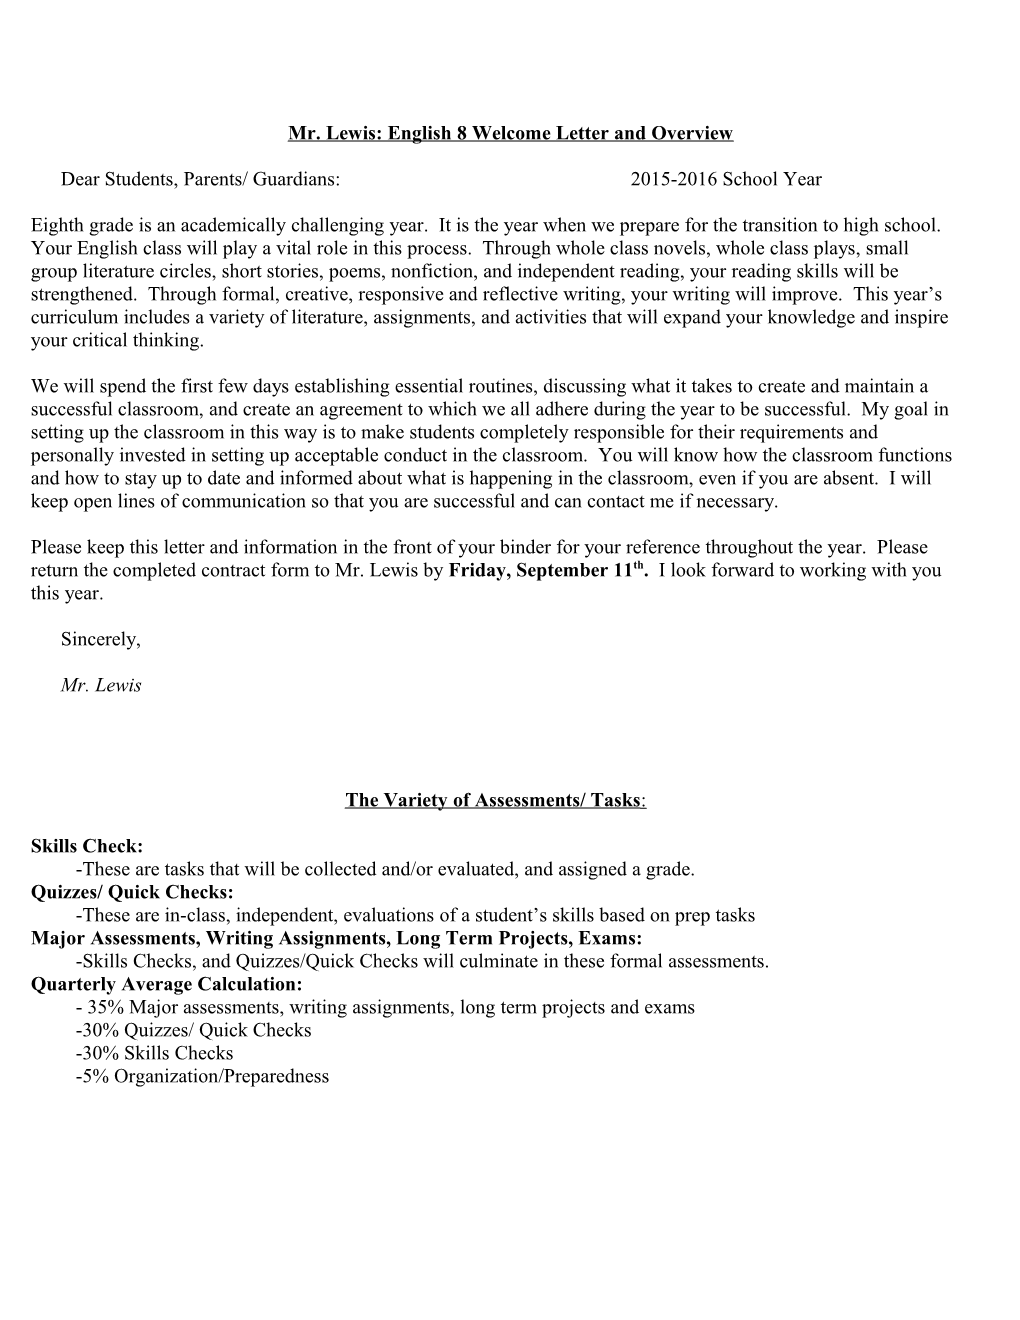 English 8 Welcome Letter and Overview